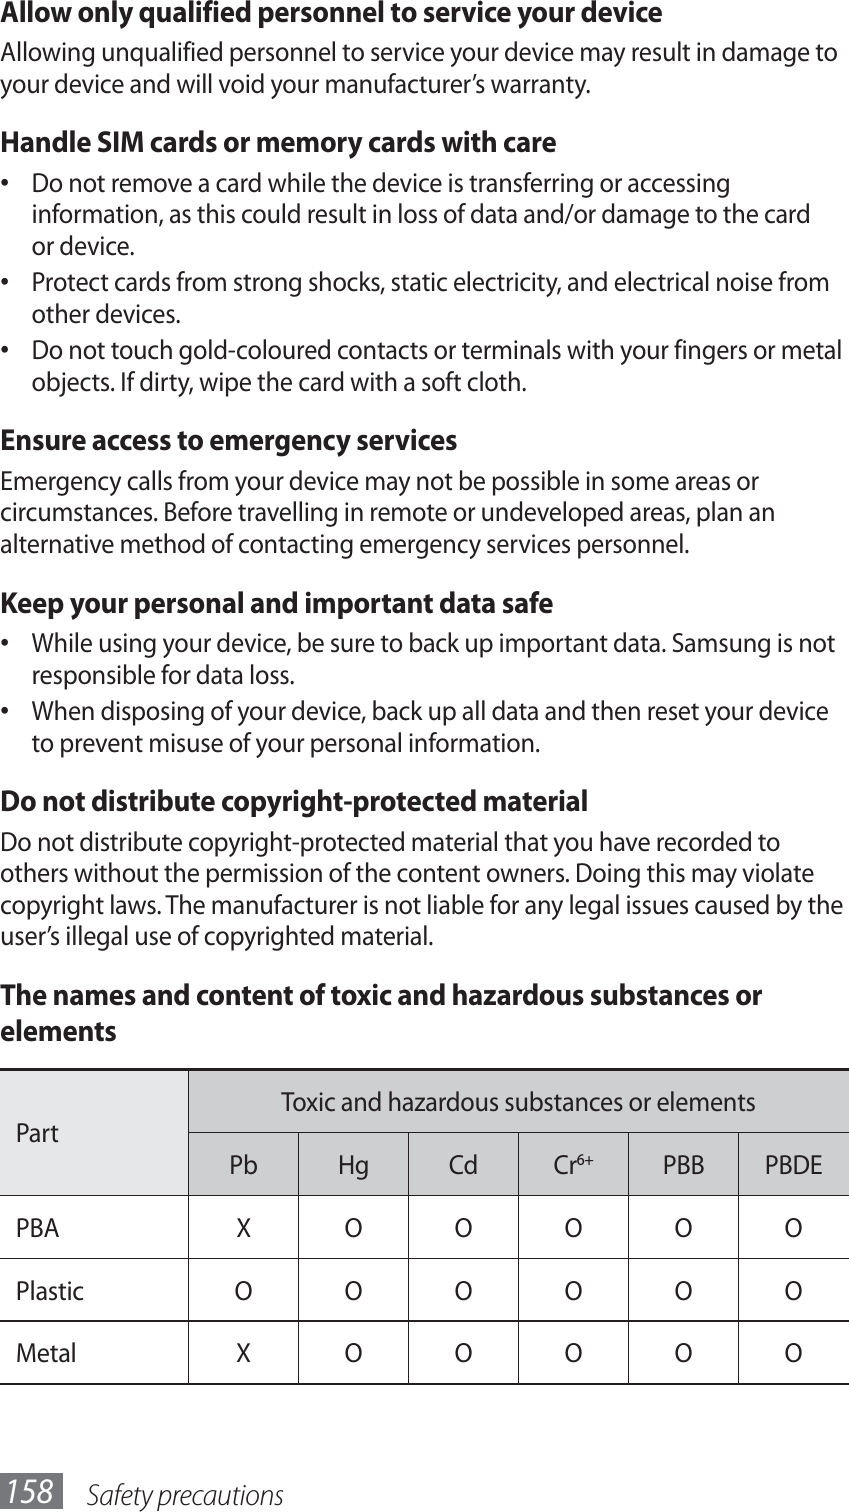 Safety precautions158Allow only qualified personnel to service your deviceAllowing unqualified personnel to service your device may result in damage to your device and will void your manufacturer’s warranty.Handle SIM cards or memory cards with careDo not remove a card while the device is transferring or accessing • information, as this could result in loss of data and/or damage to the card or device.Protect cards from strong shocks, static electricity, and electrical noise from • other devices.Do not touch gold-coloured contacts or terminals with your fingers or metal • objects. If dirty, wipe the card with a soft cloth.Ensure access to emergency servicesEmergency calls from your device may not be possible in some areas or circumstances. Before travelling in remote or undeveloped areas, plan an alternative method of contacting emergency services personnel.Keep your personal and important data safeWhile using your device, be sure to back up important data. Samsung is not • responsible for data loss.When disposing of your device, back up all data and then reset your device • to prevent misuse of your personal information.Do not distribute copyright-protected materialDo not distribute copyright-protected material that you have recorded to others without the permission of the content owners. Doing this may violate copyright laws. The manufacturer is not liable for any legal issues caused by the user’s illegal use of copyrighted material.The names and content of toxic and hazardous substances or elementsPartToxic and hazardous substances or elementsPb Hg Cd Cr6+PBB PBDEPBA X O O O O OPlastic O O O O O OMetal X O O O O O